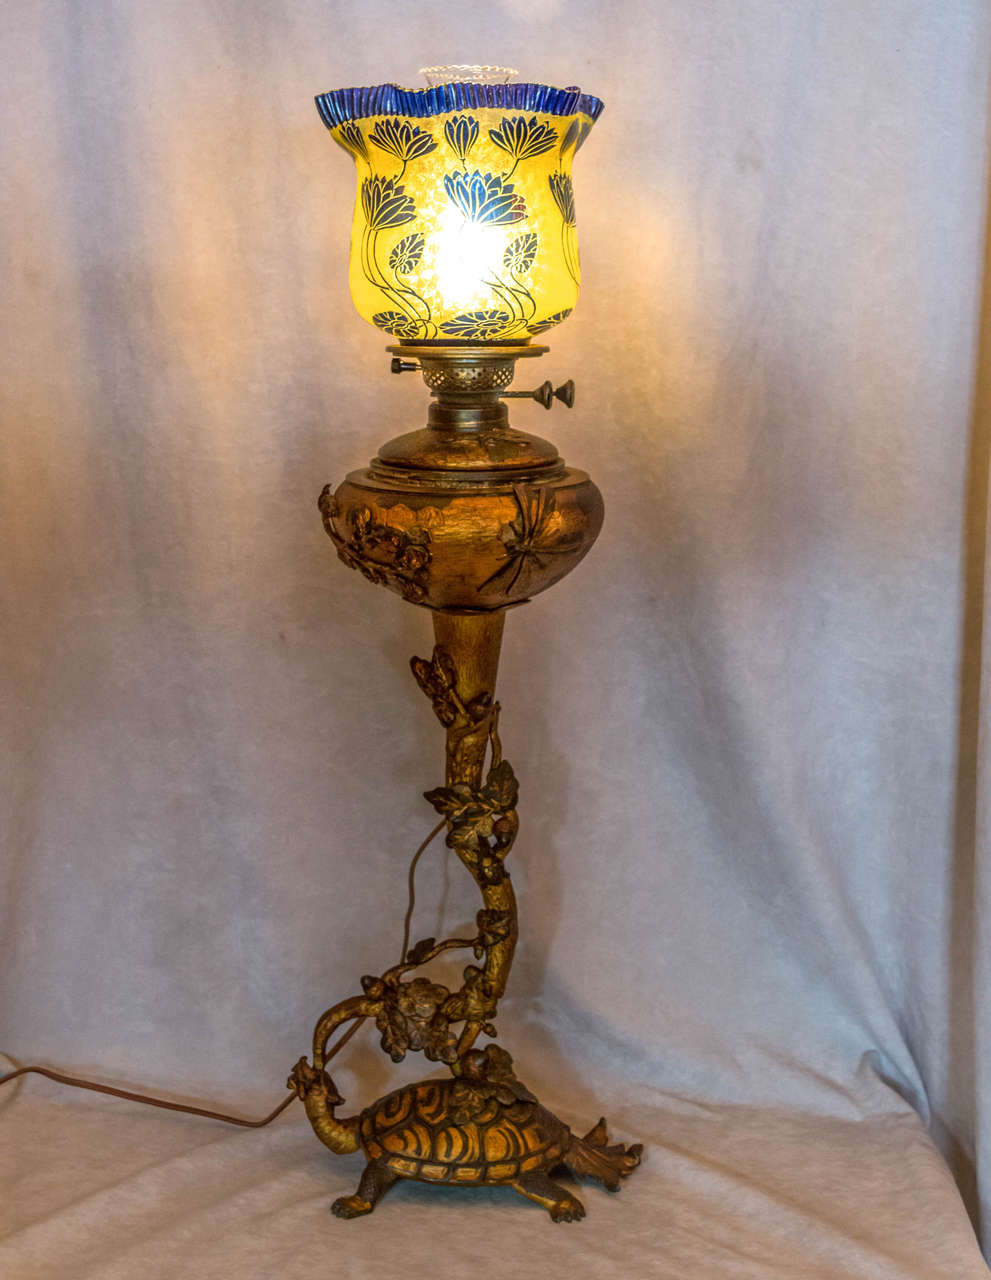 Admittedly, we rarely buy kerosene lamps, but this one really spoke to us. We love bronze and the vast majority of kerosene lamps are not bronze. As we say in our description, we checked and it is bronze. It is French and comes with an incredible